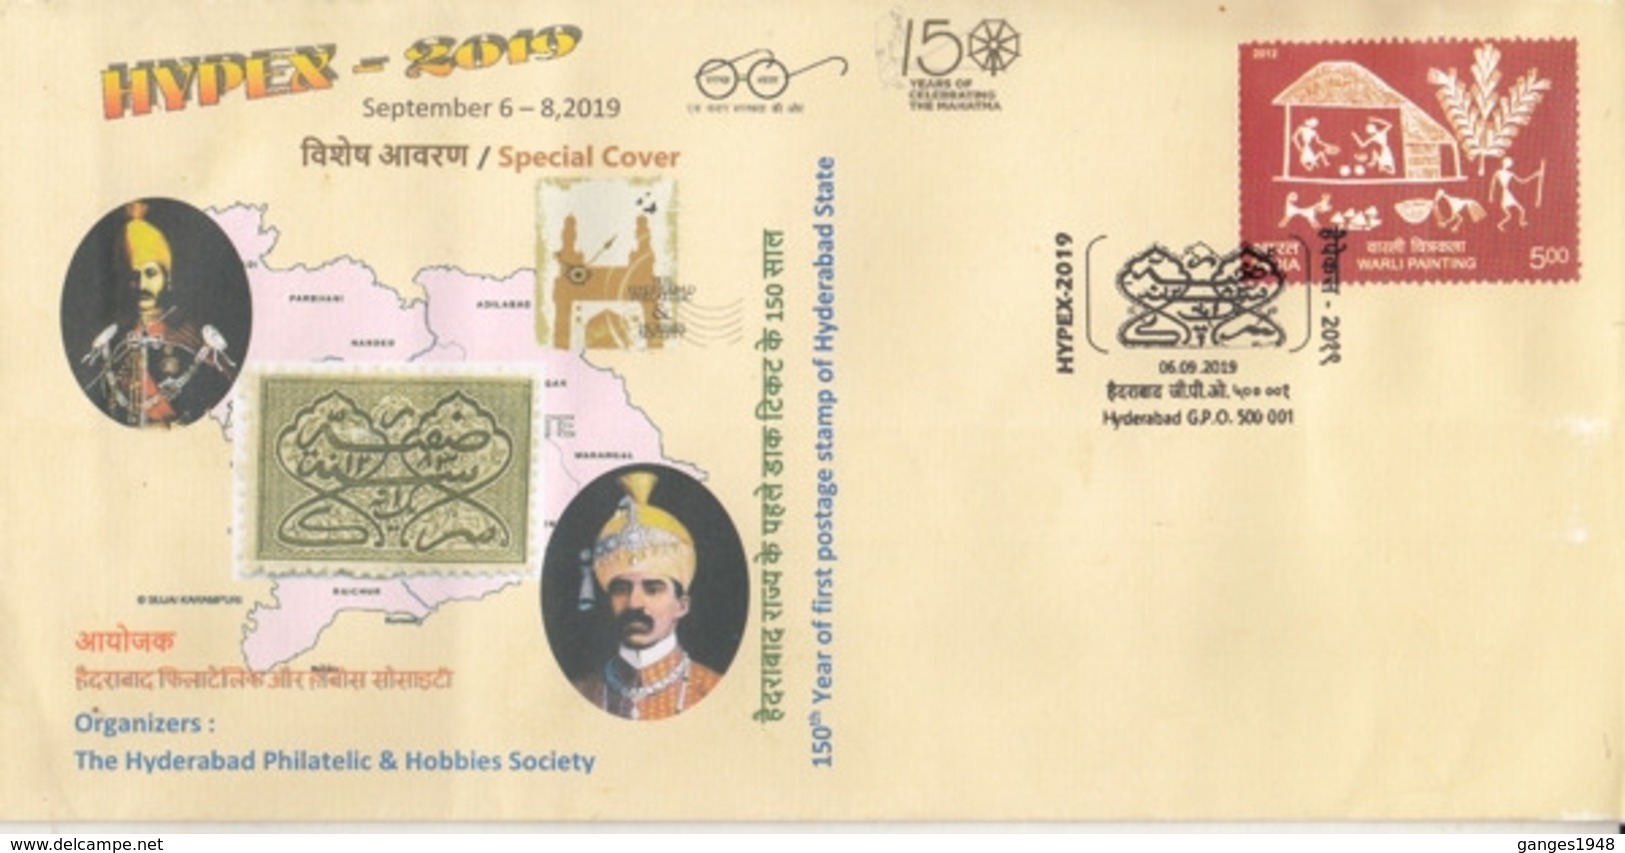 India  2019  Hyderabad Stamp Printed  Nizam,s Photos  State Cancellation  Special Cover  # 23425   C&D Inde  Indien - Hyderabad